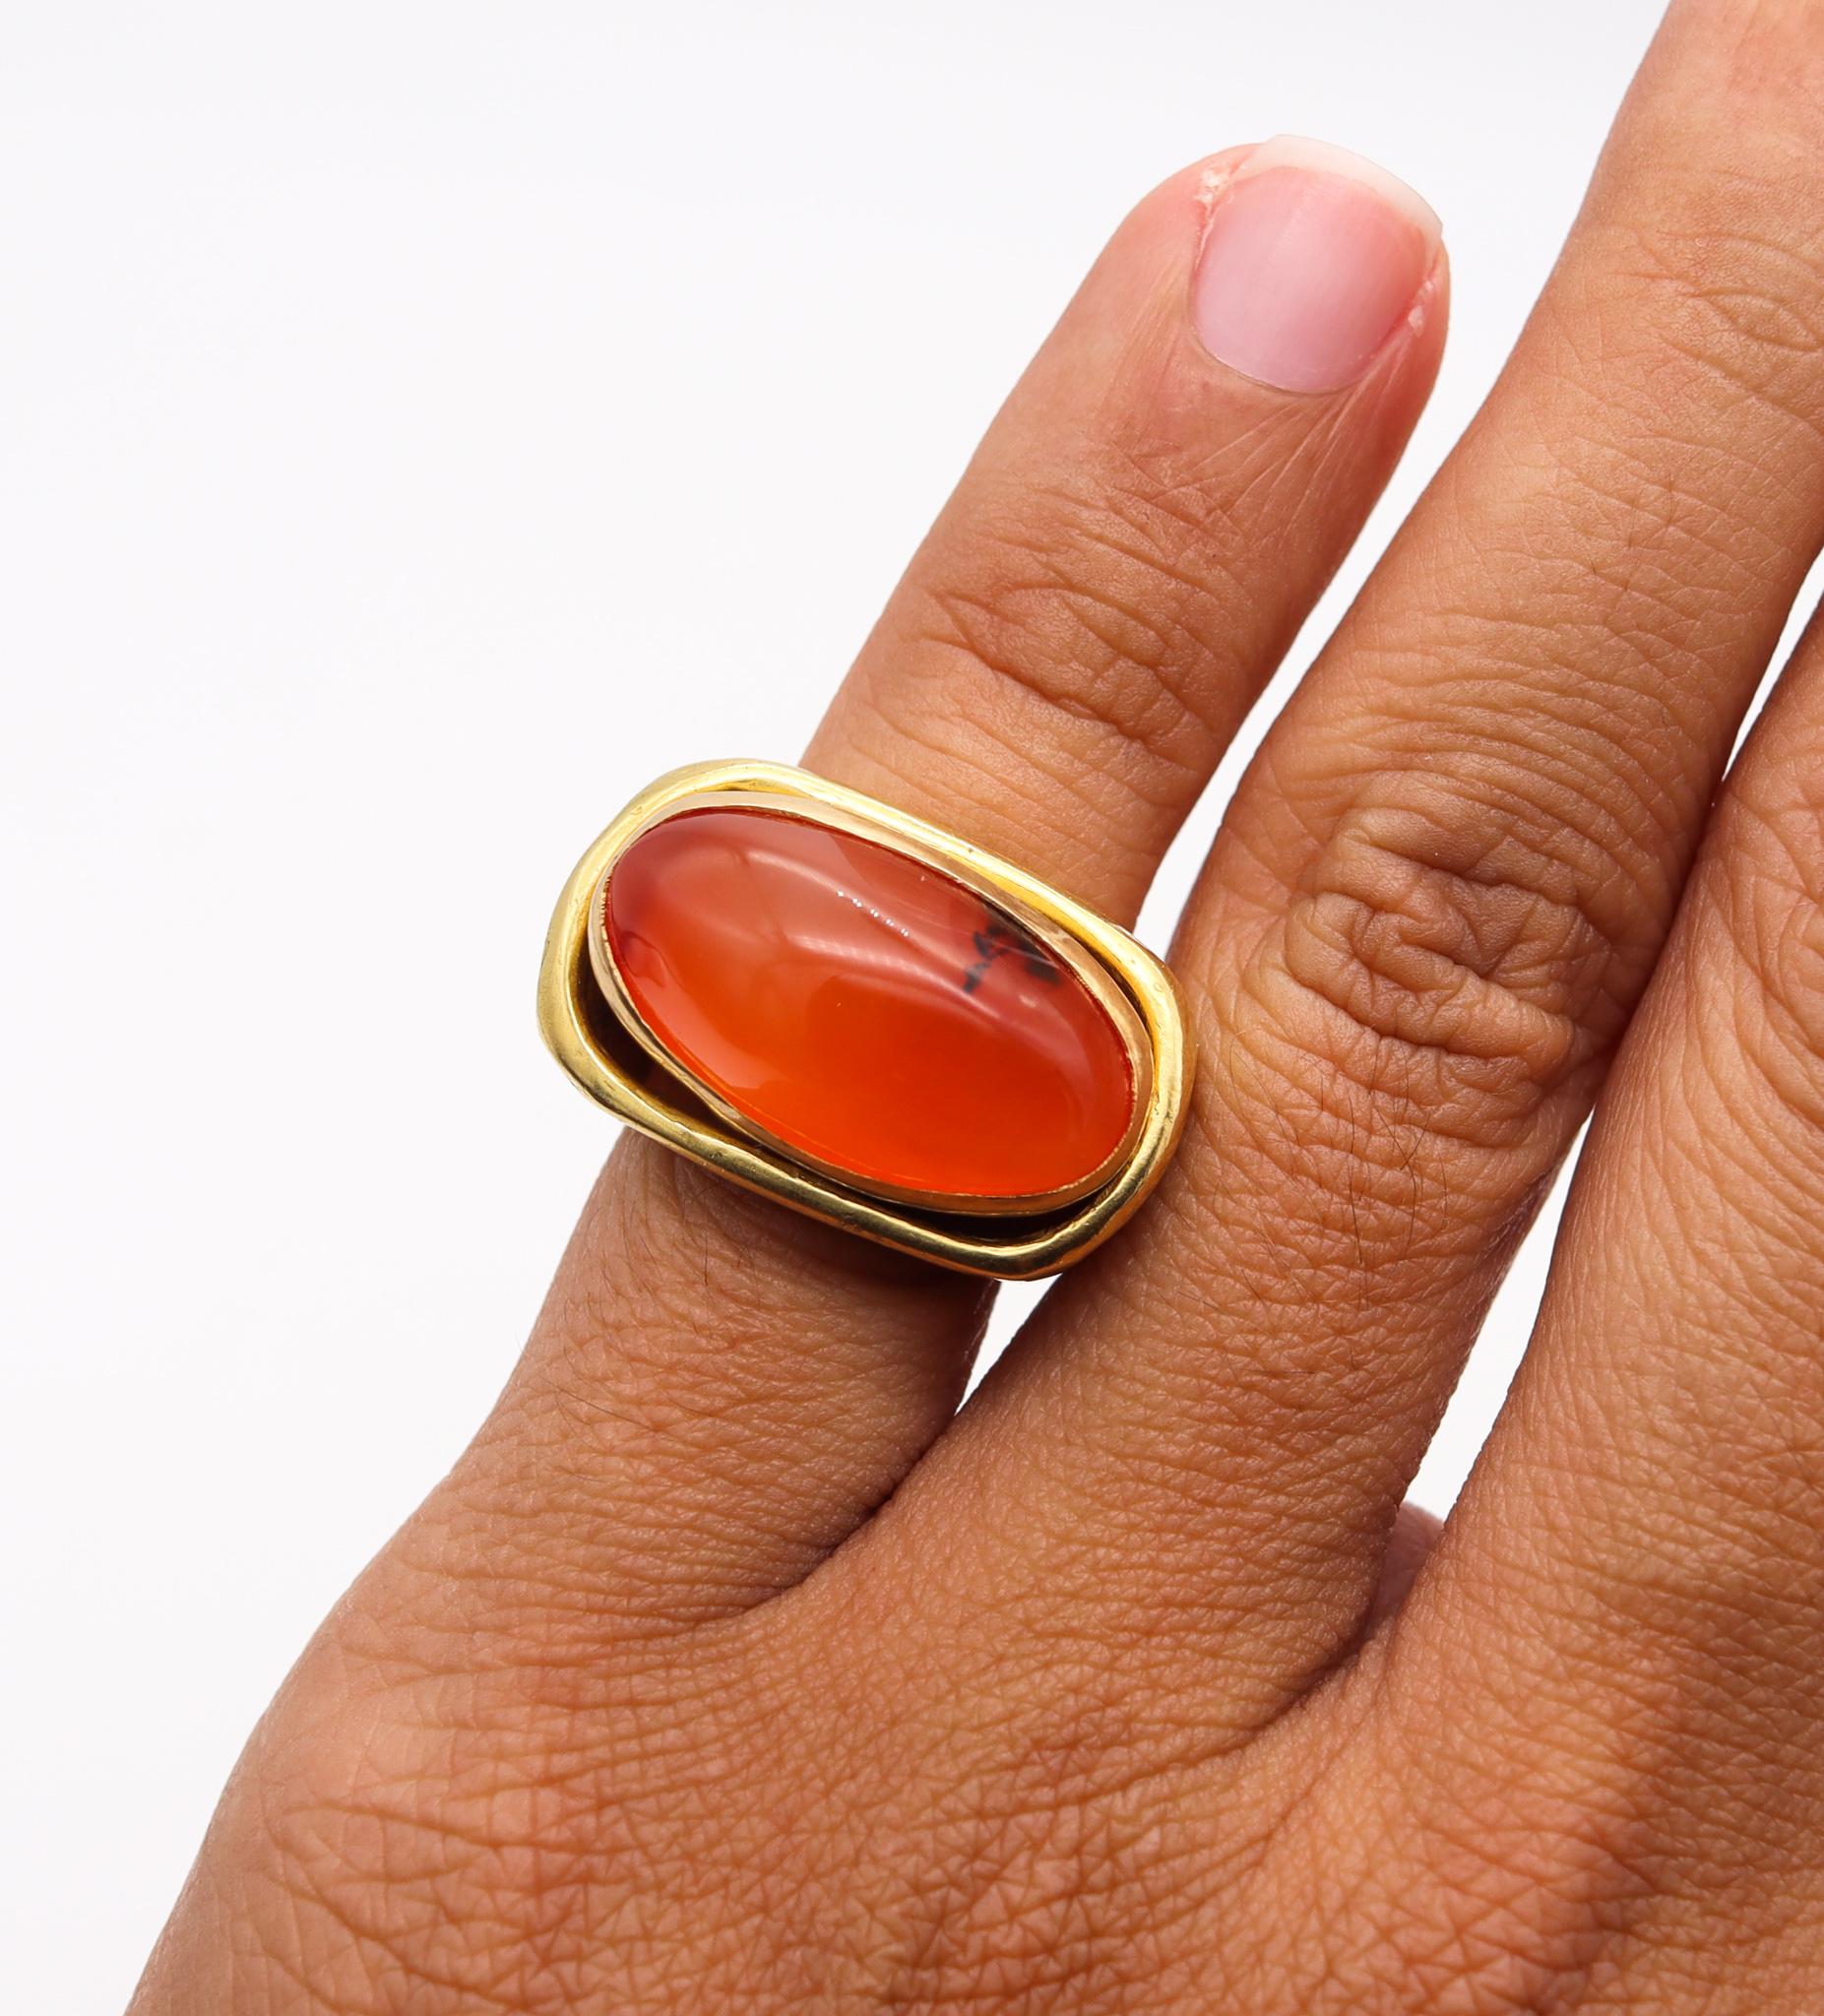 Alvaro & Correnti Messina Convertible Cocktail Ring 18Kt Gold 18.8 Cts Carnelian In Excellent Condition For Sale In Miami, FL